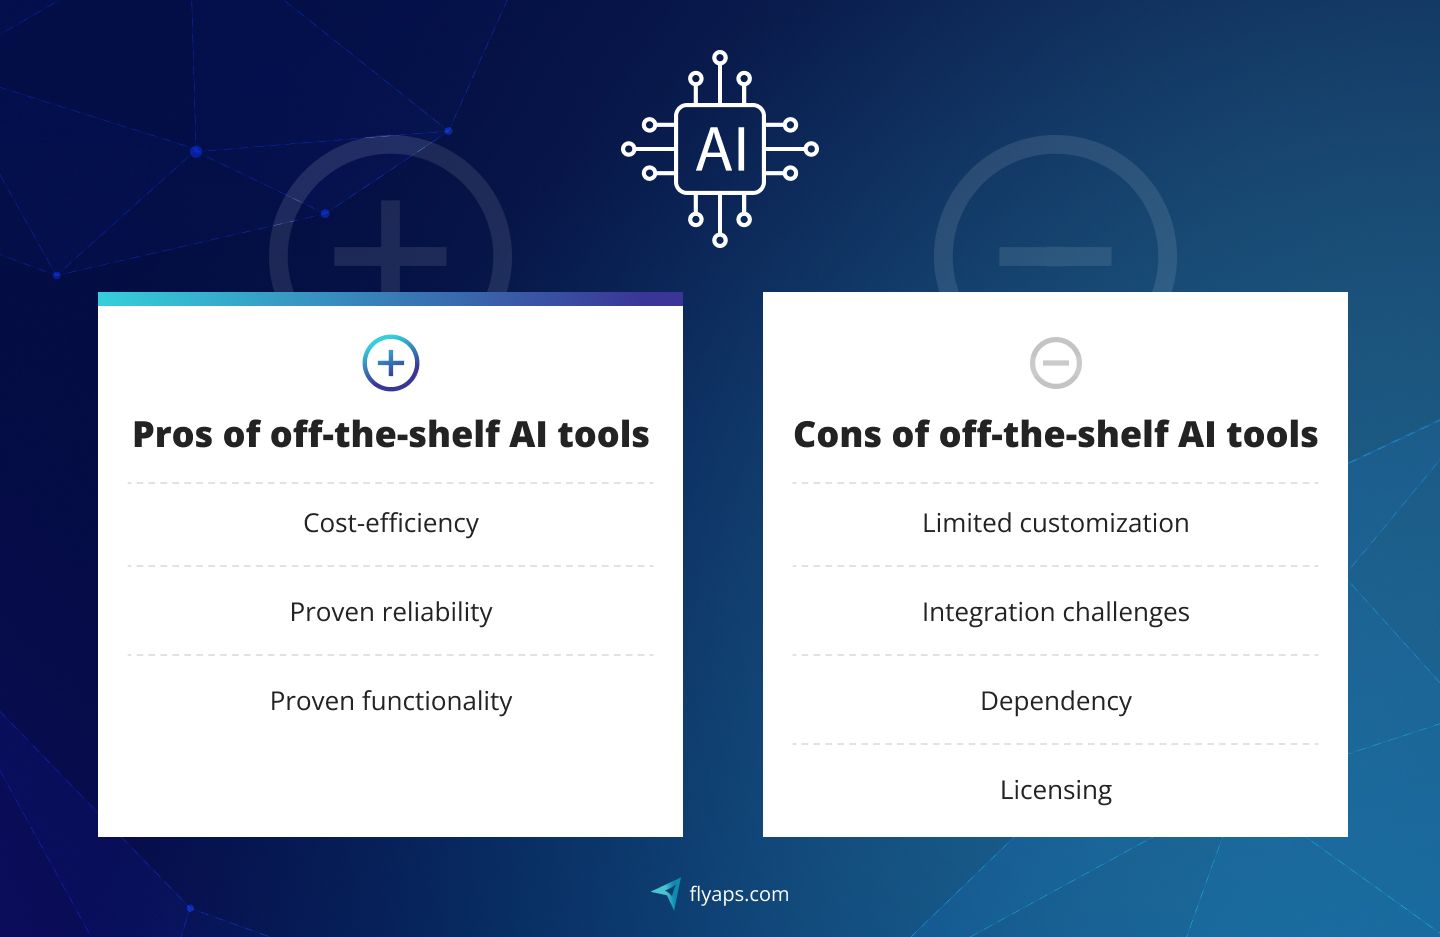 Pros and cons of off-the-shelf AI tools